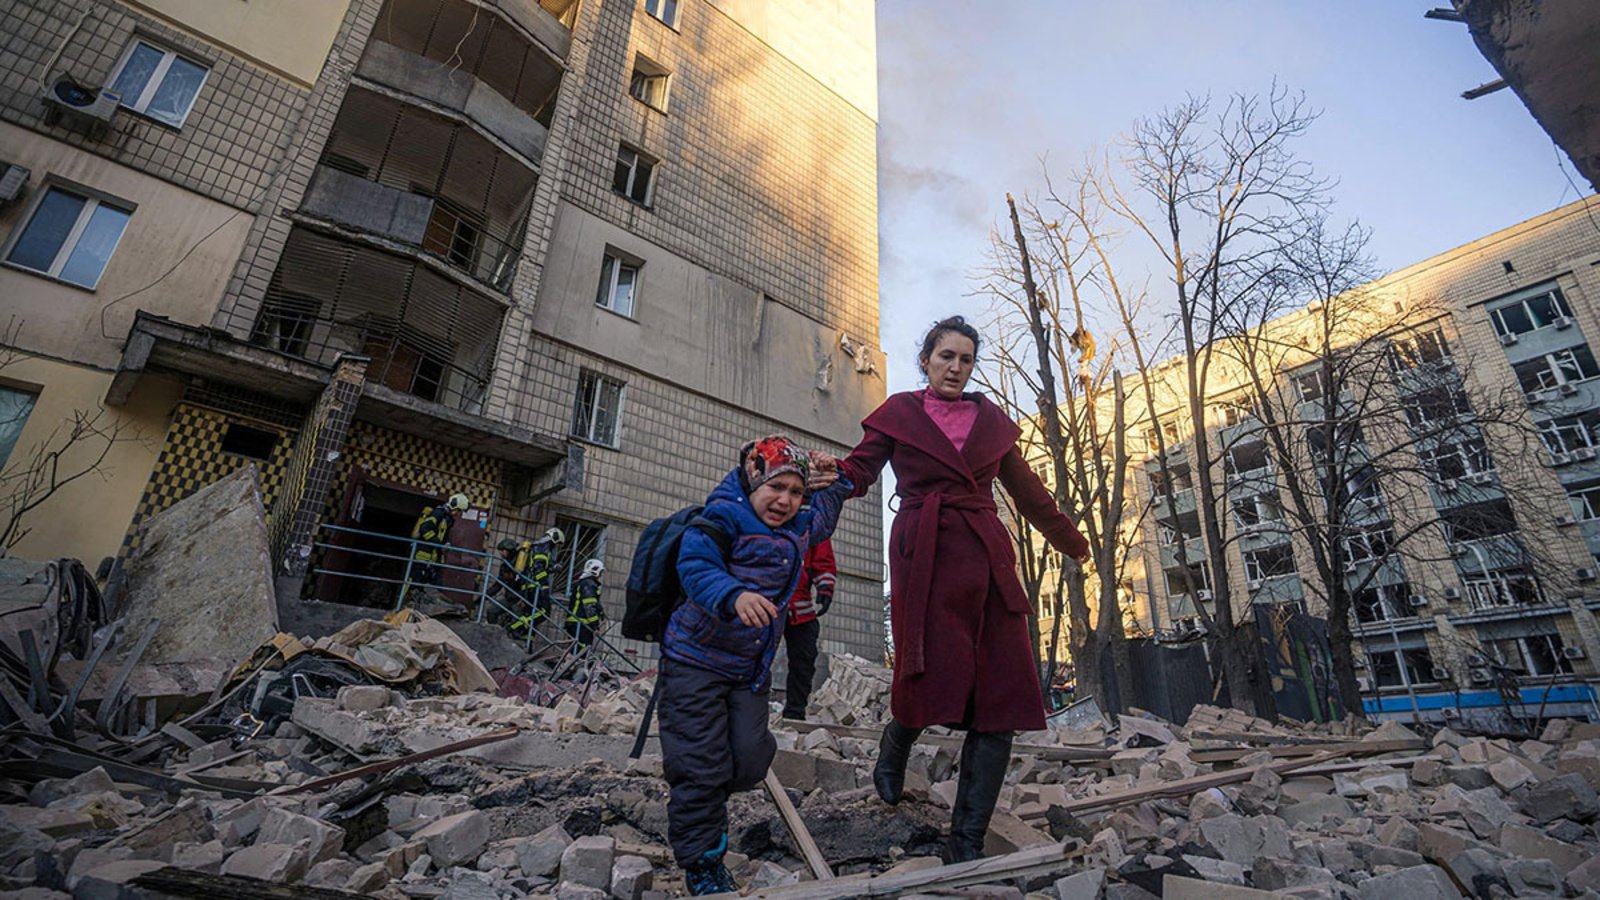 Can Russia Be Held Accountable for War Crimes in Ukraine? Council on Foreign Relations